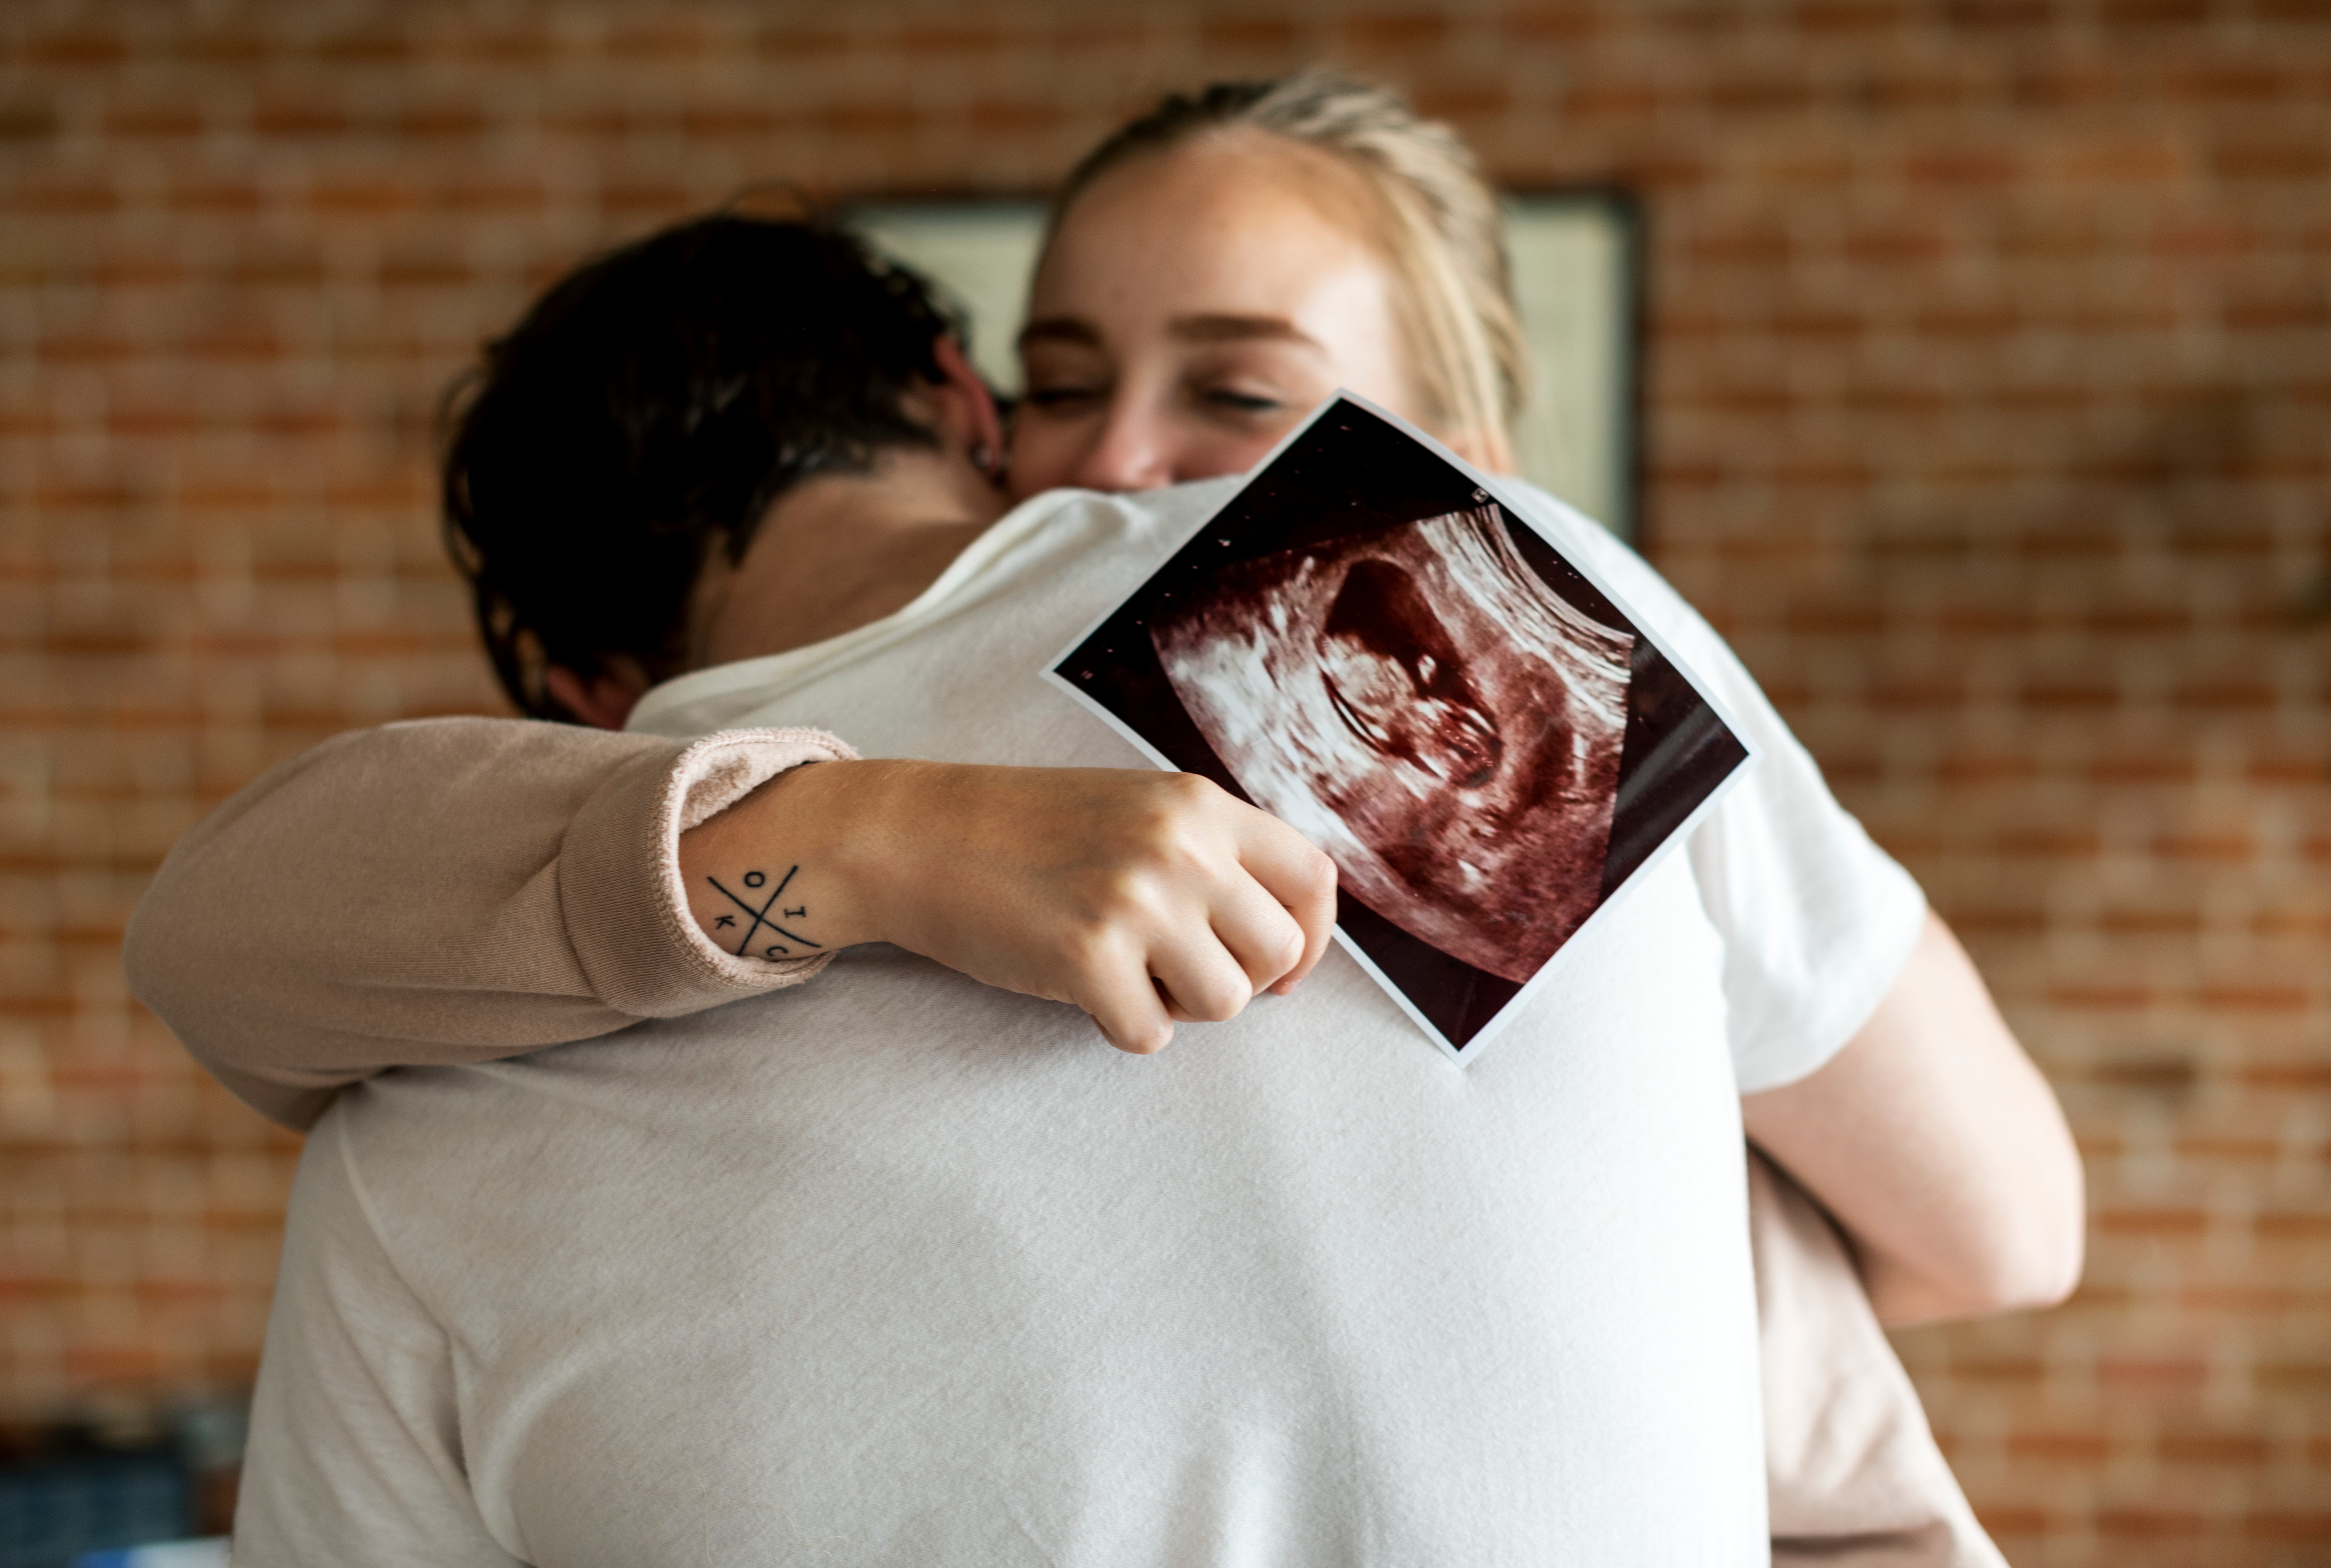 Pregnancy impacts on your dental and vision health